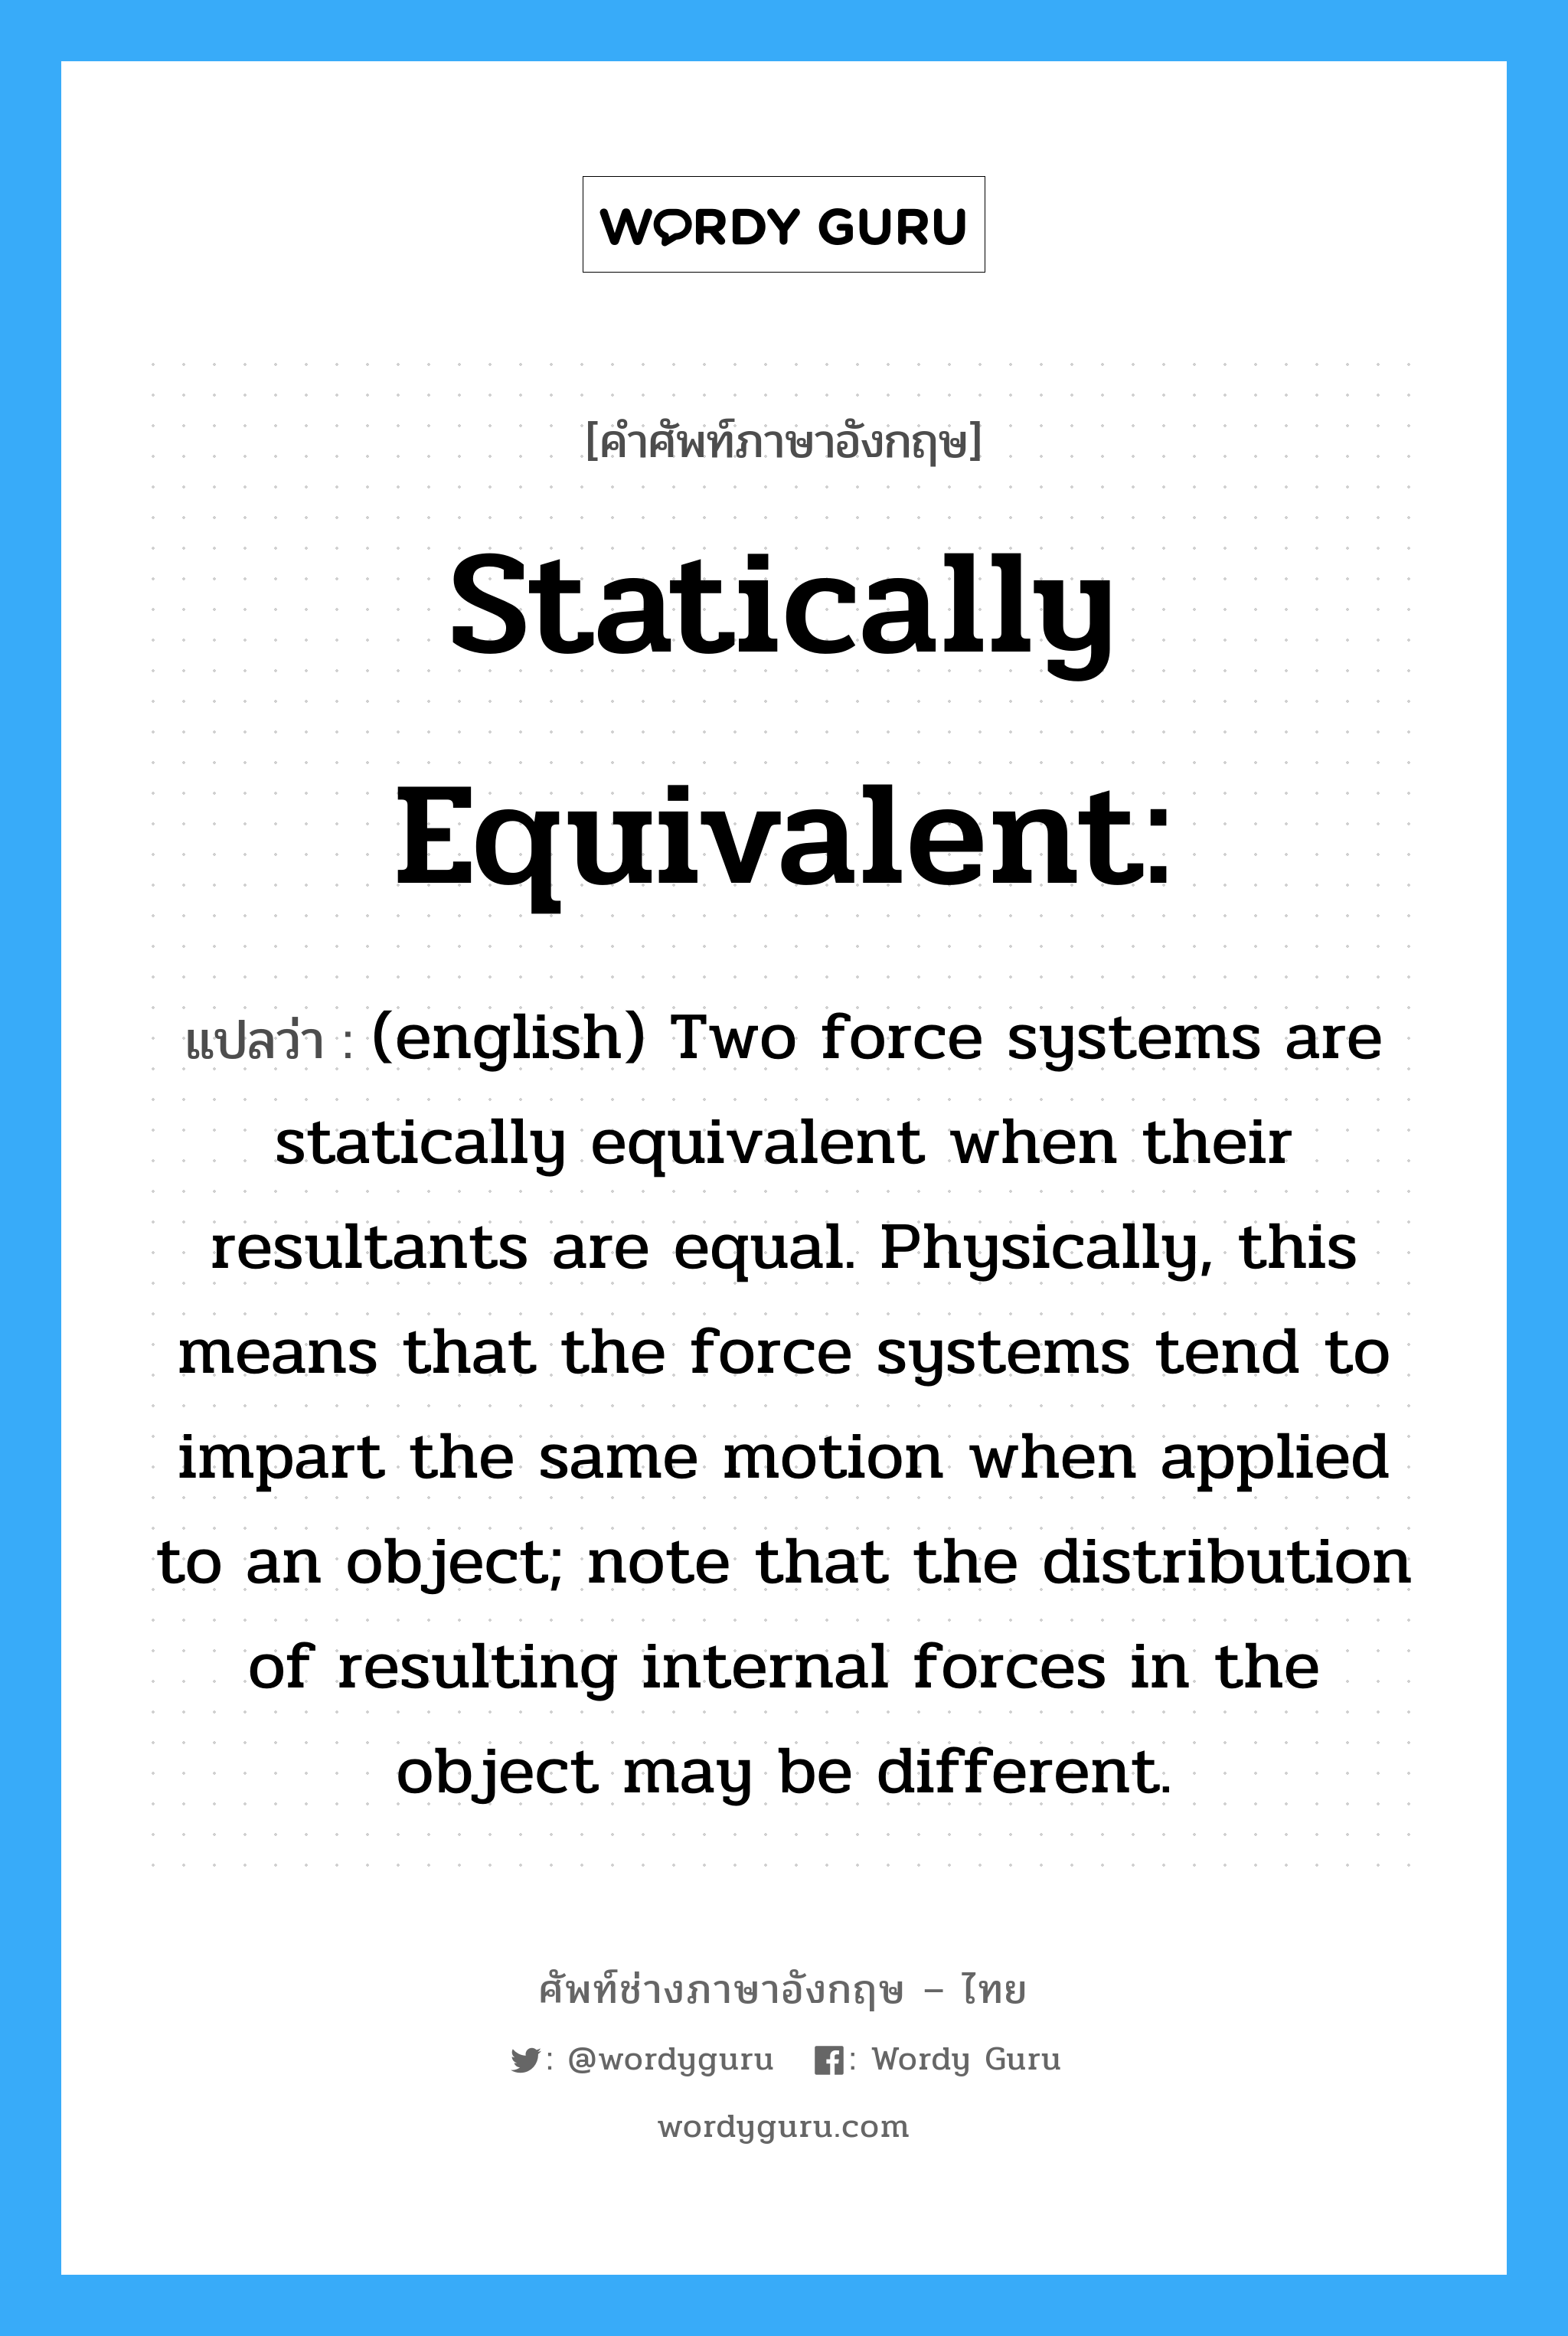 Statically equivalent: แปลว่า?, คำศัพท์ช่างภาษาอังกฤษ - ไทย Statically equivalent: คำศัพท์ภาษาอังกฤษ Statically equivalent: แปลว่า (english) Two force systems are statically equivalent when their resultants are equal. Physically, this means that the force systems tend to impart the same motion when applied to an object; note that the distribution of resulting internal forces in the object may be different.